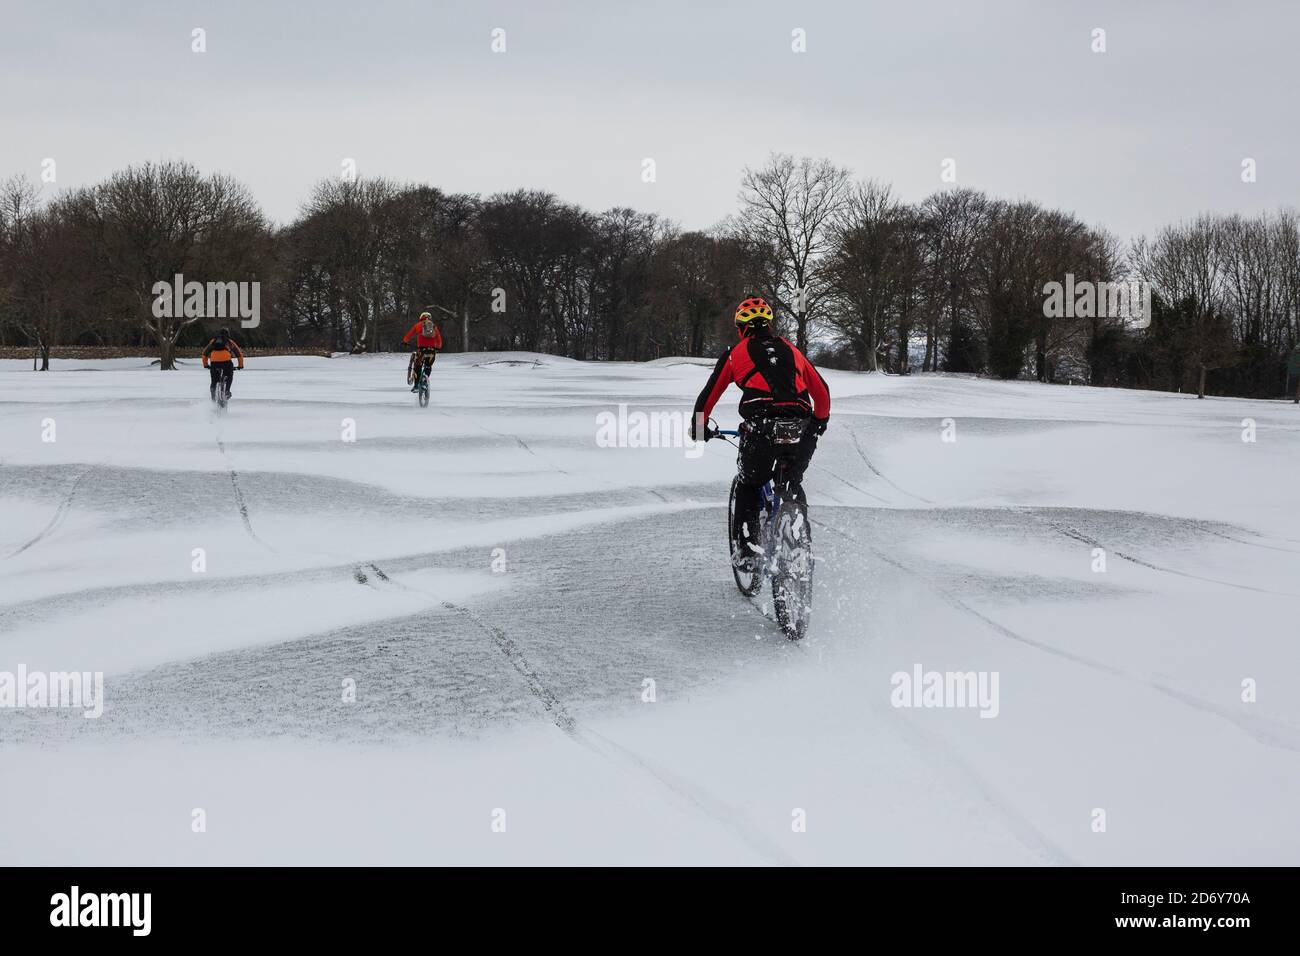 Mountain bikers cycling across a snowy landscape Stock Photo